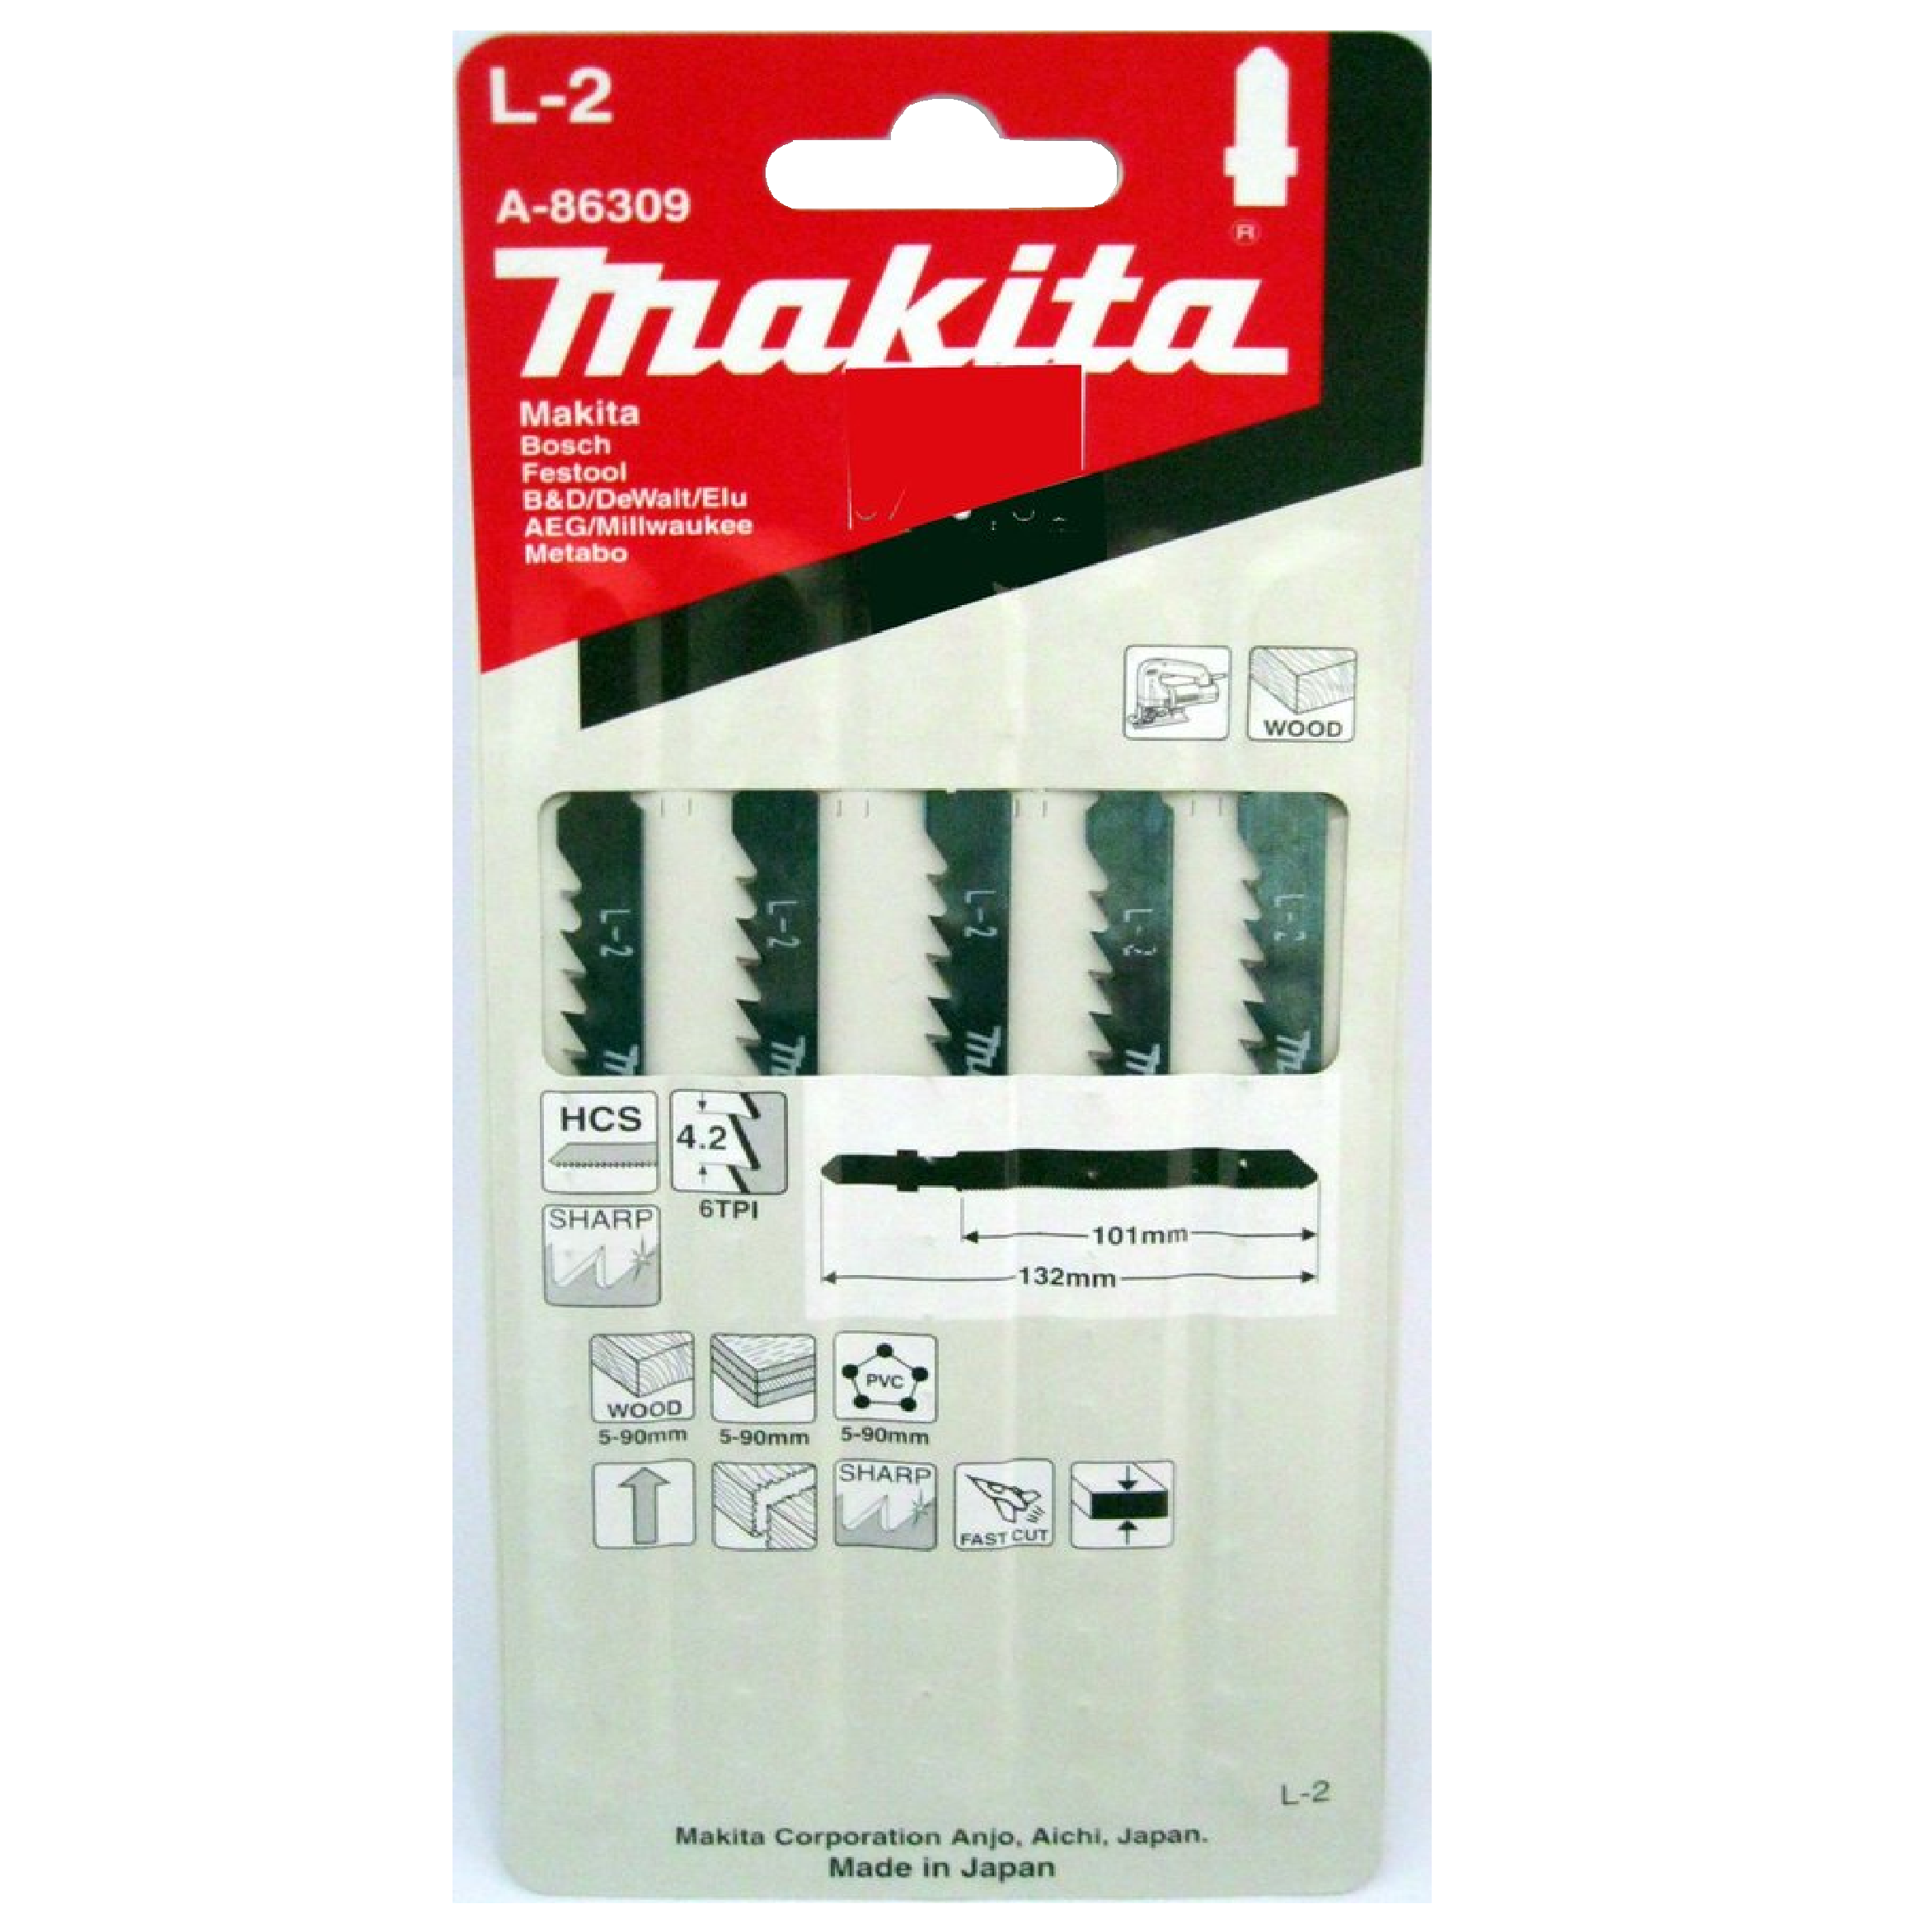 Makita A-86309 L-2 LONG Blades For Jigsaw 5PC/Pack